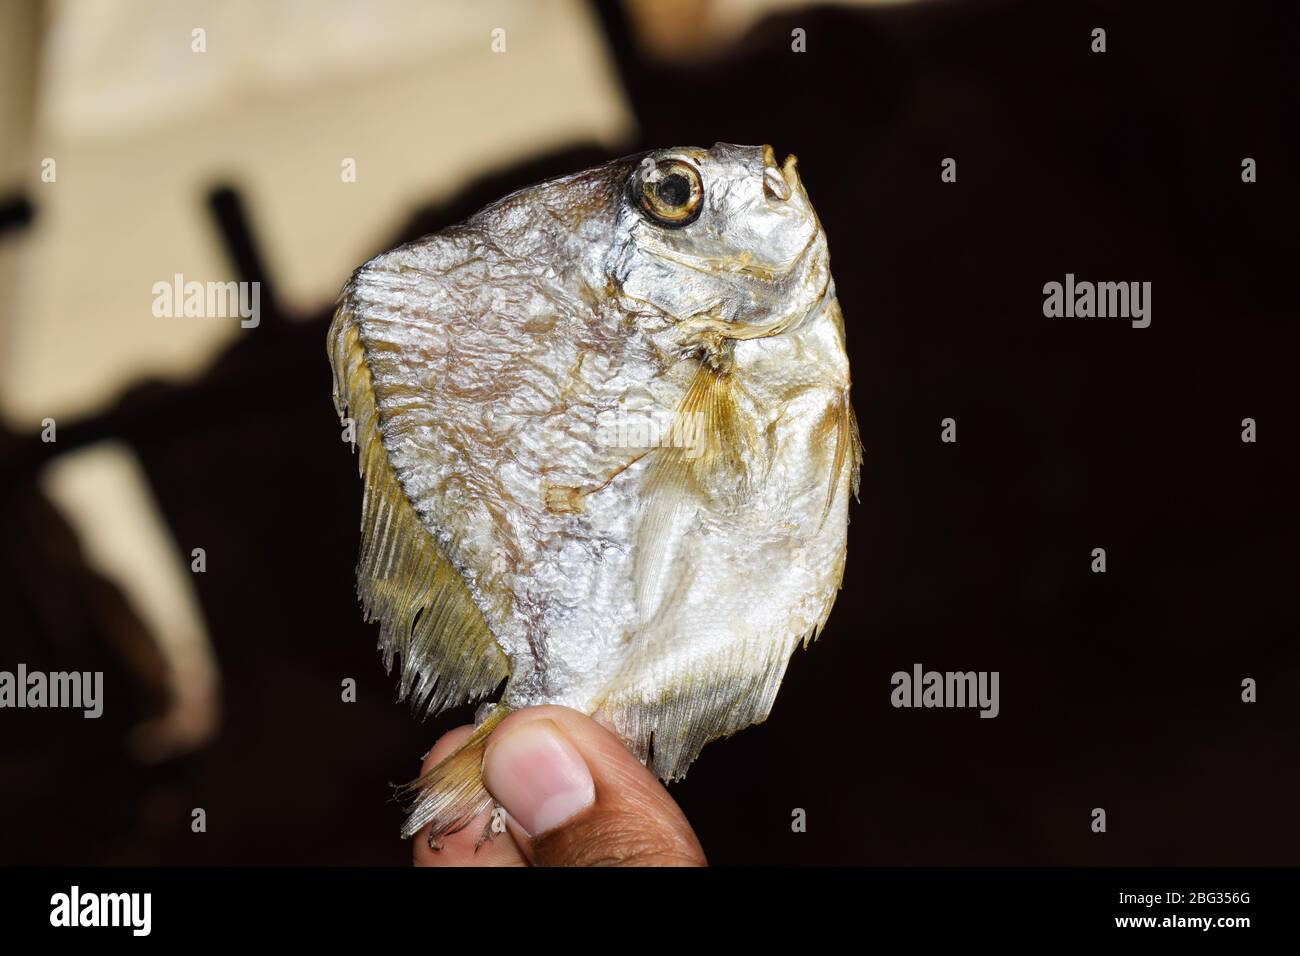 Fresh dry fish in a persons hand ,who is holding it very gently with his delicate fingers Stock Photo